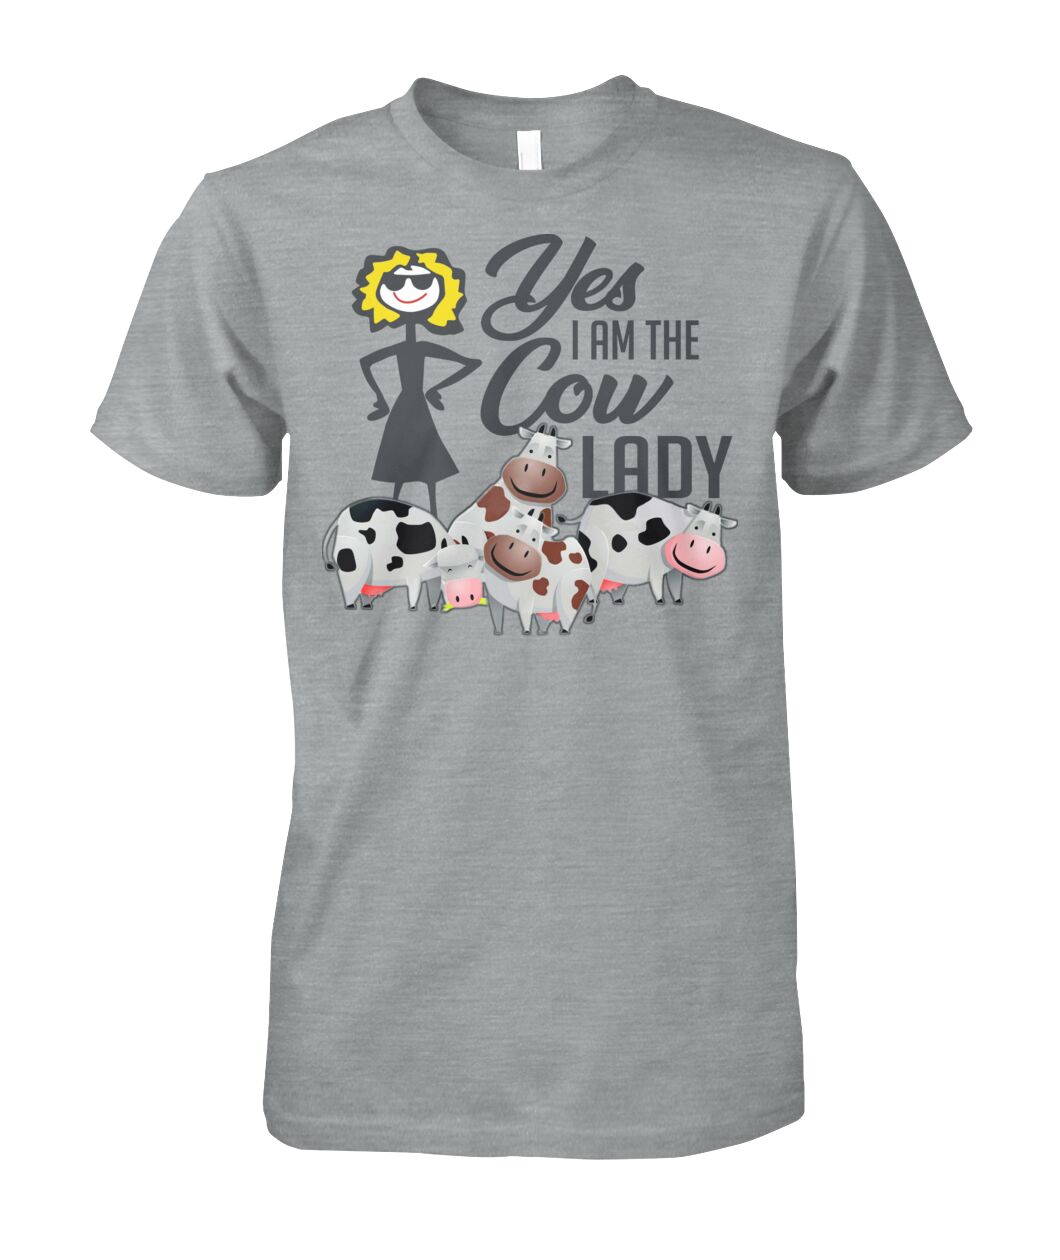 Cow lady - Men's and Women's t-shirt , Vneck, Hoodies - myfunfarm - clothing acceessories shoes for cow lovers, pig, horse, cat, sheep, dog, chicken, goat farmer